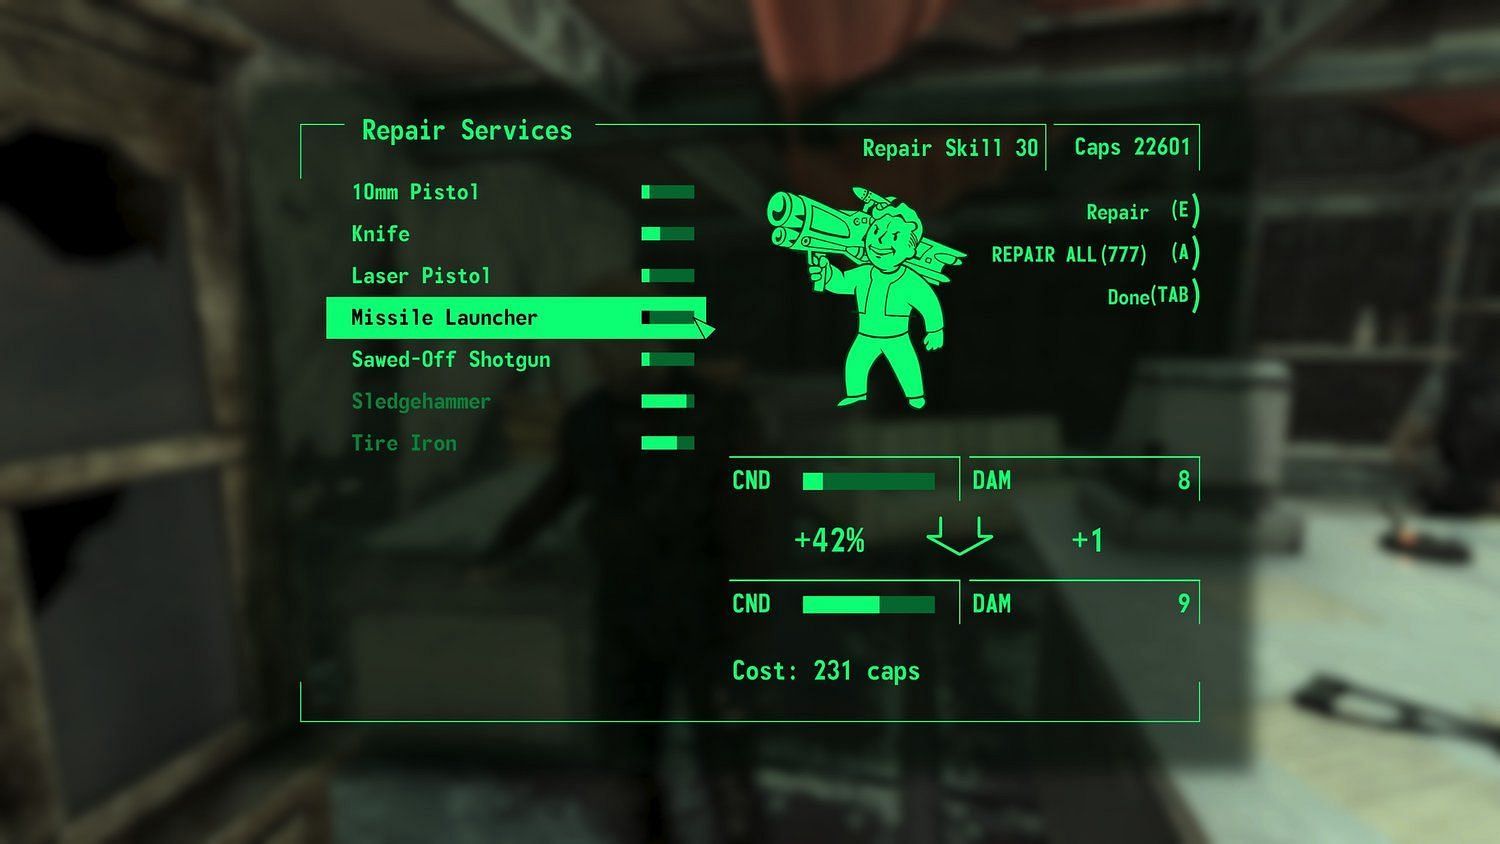 Fallout 3 remake mod Capital Wasteland is back in development